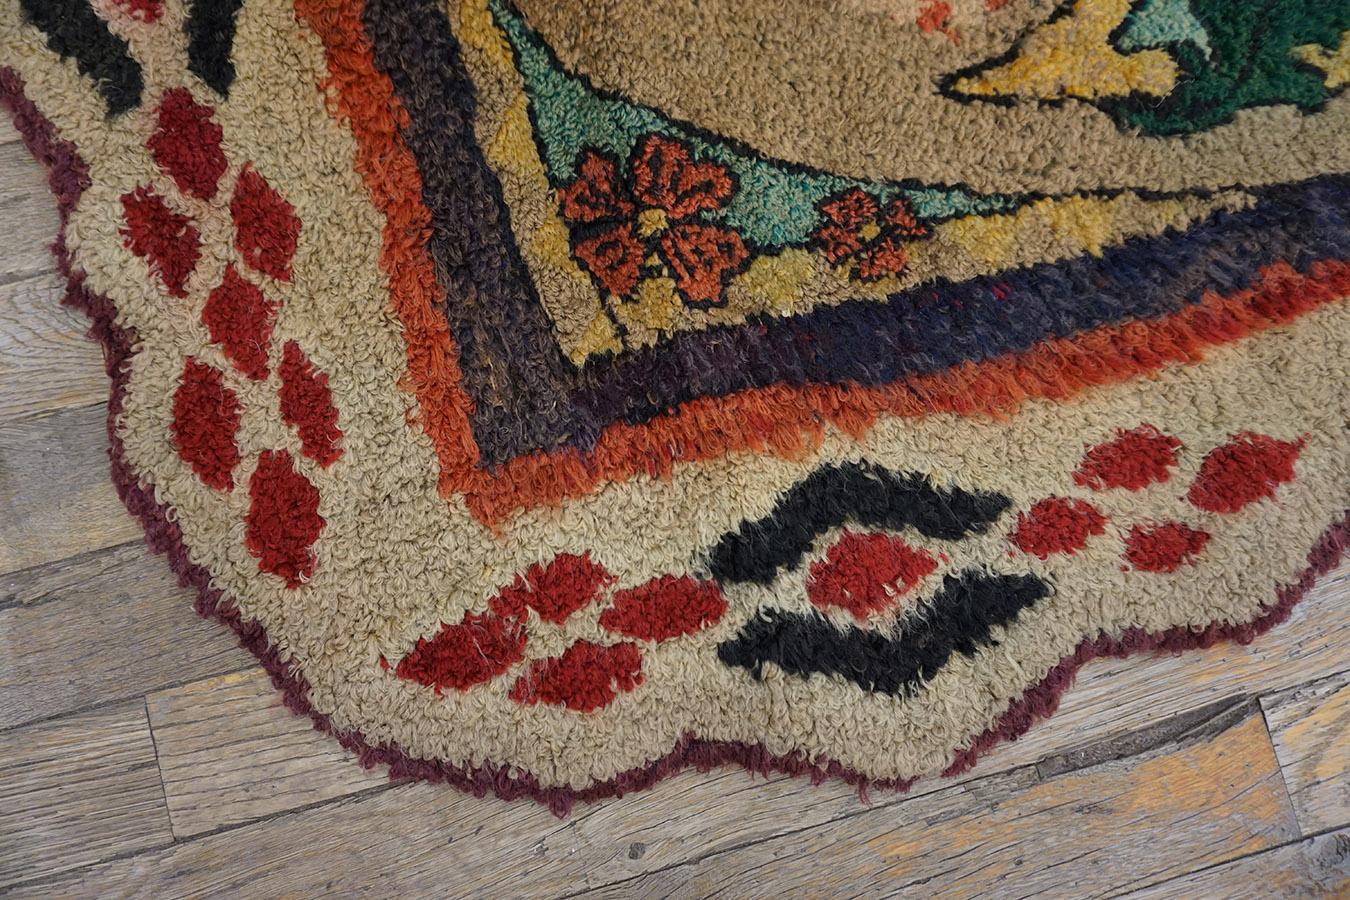 Hand-Woven Early 20th Century Pictorial American Hooked Rug ( 2'8